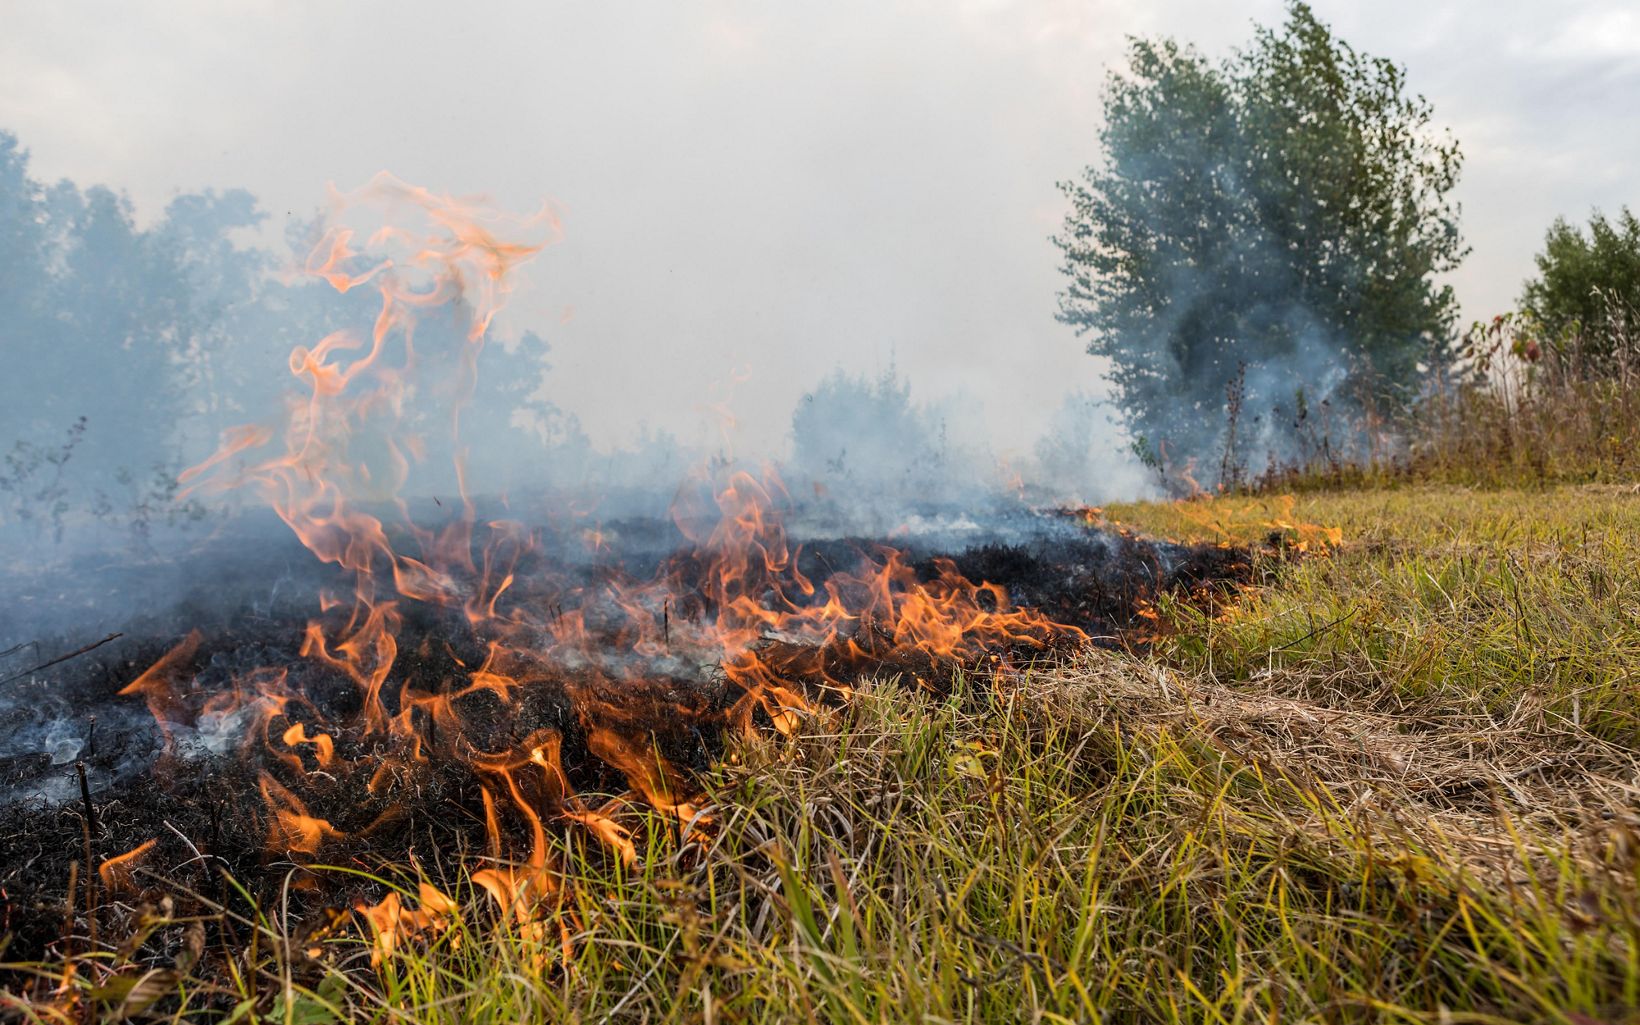 Grasses Afire  Edge of the controlled burn creates "black" where the fuels have been used up. © Jerry and Marcy Monkman/EcoPhotography